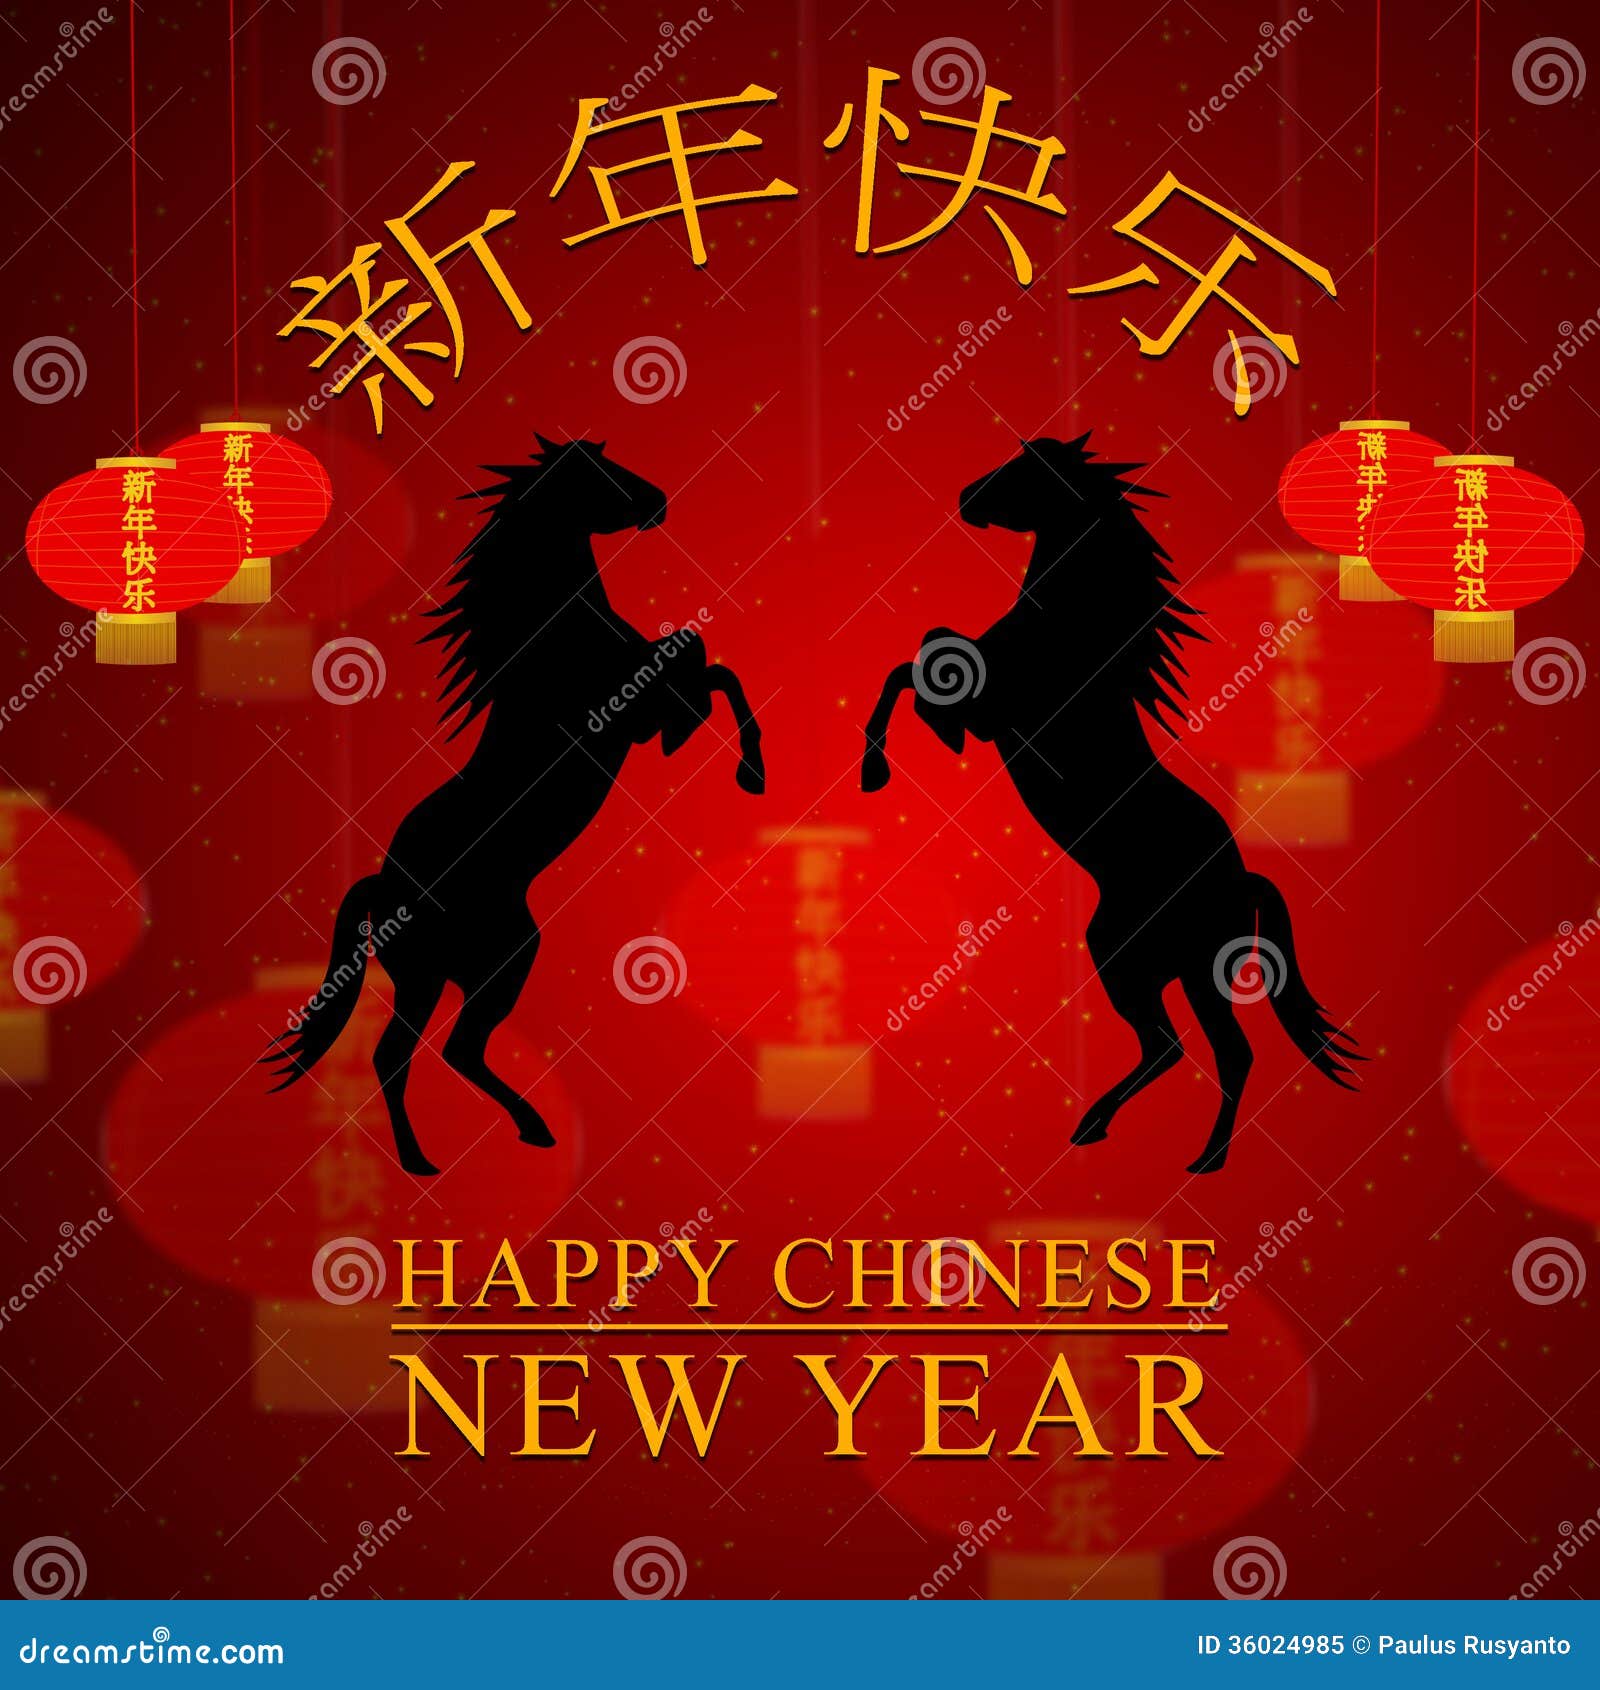 Red Happy Chinese New Year! Card Stock Vector - Image: 47810232